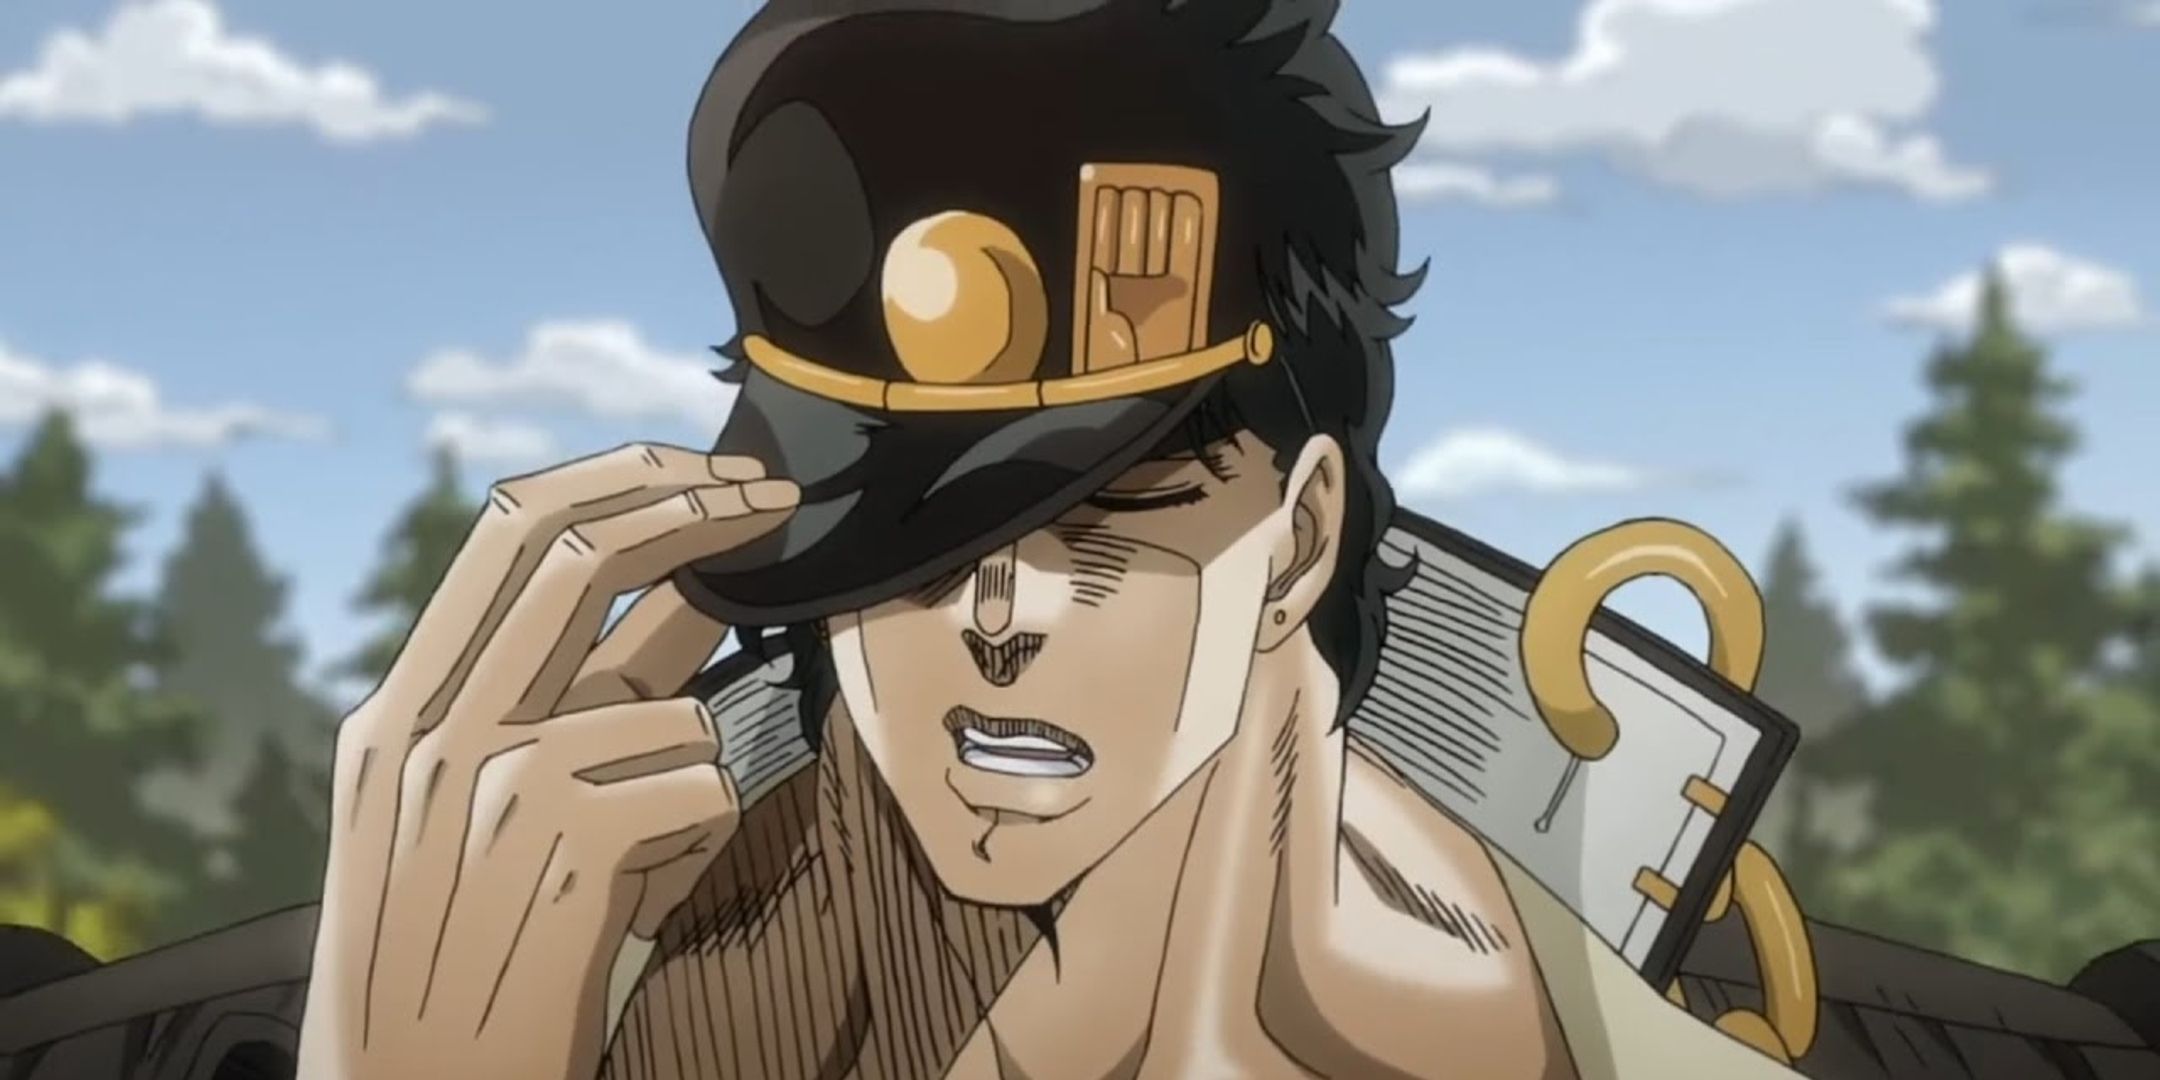 Why can Jotaro stop time like Dio at the end of Stardust Crusaders